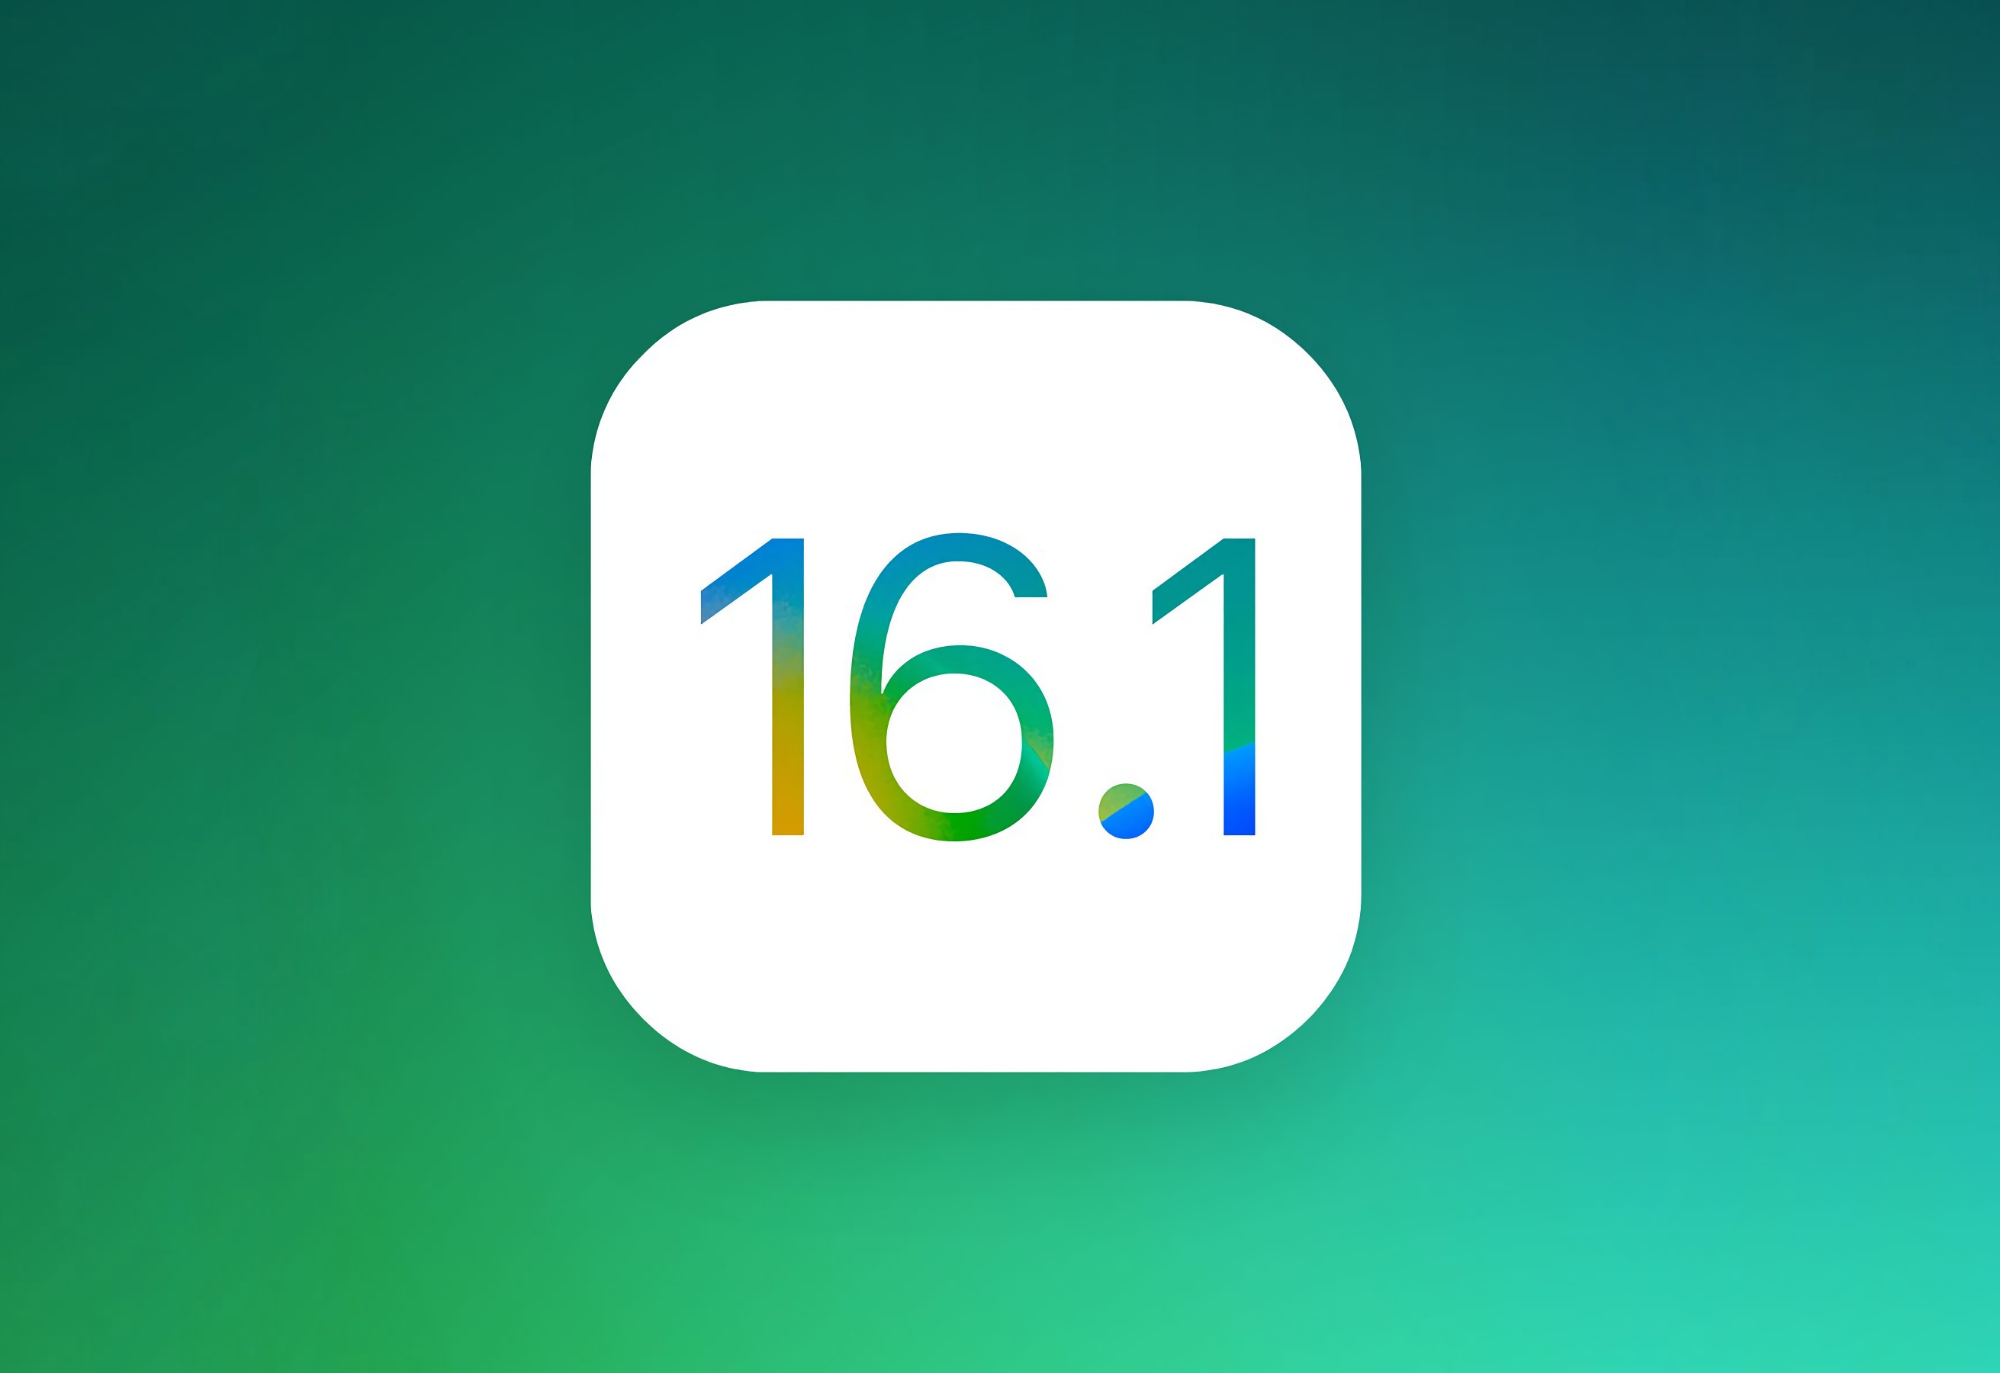 Apple has released a stable version of iOS 16.1: here's what's new